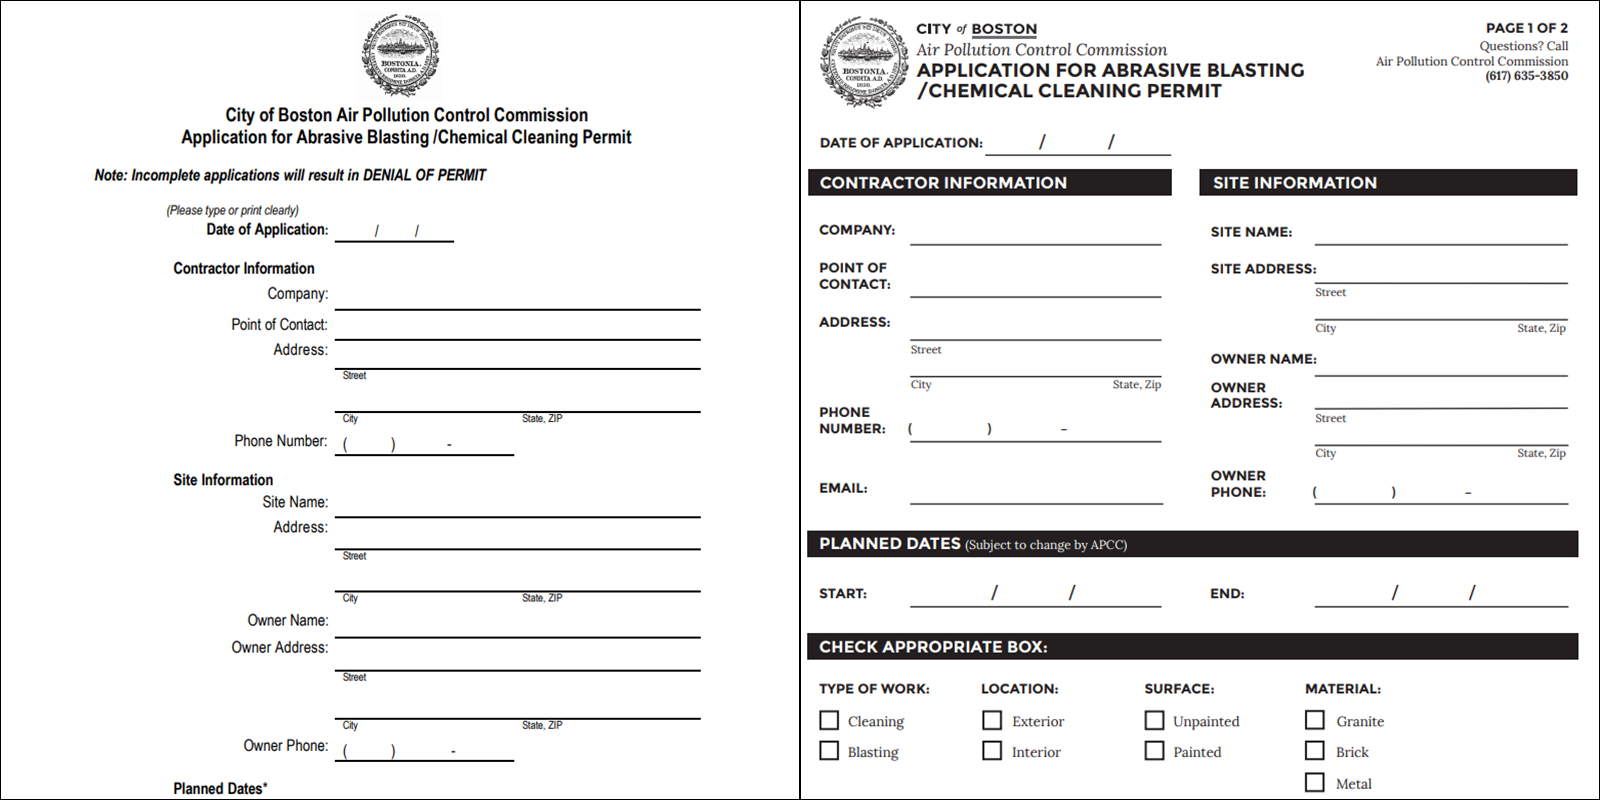 Image for  chemical cleaning permit, before (left) and after (right) 